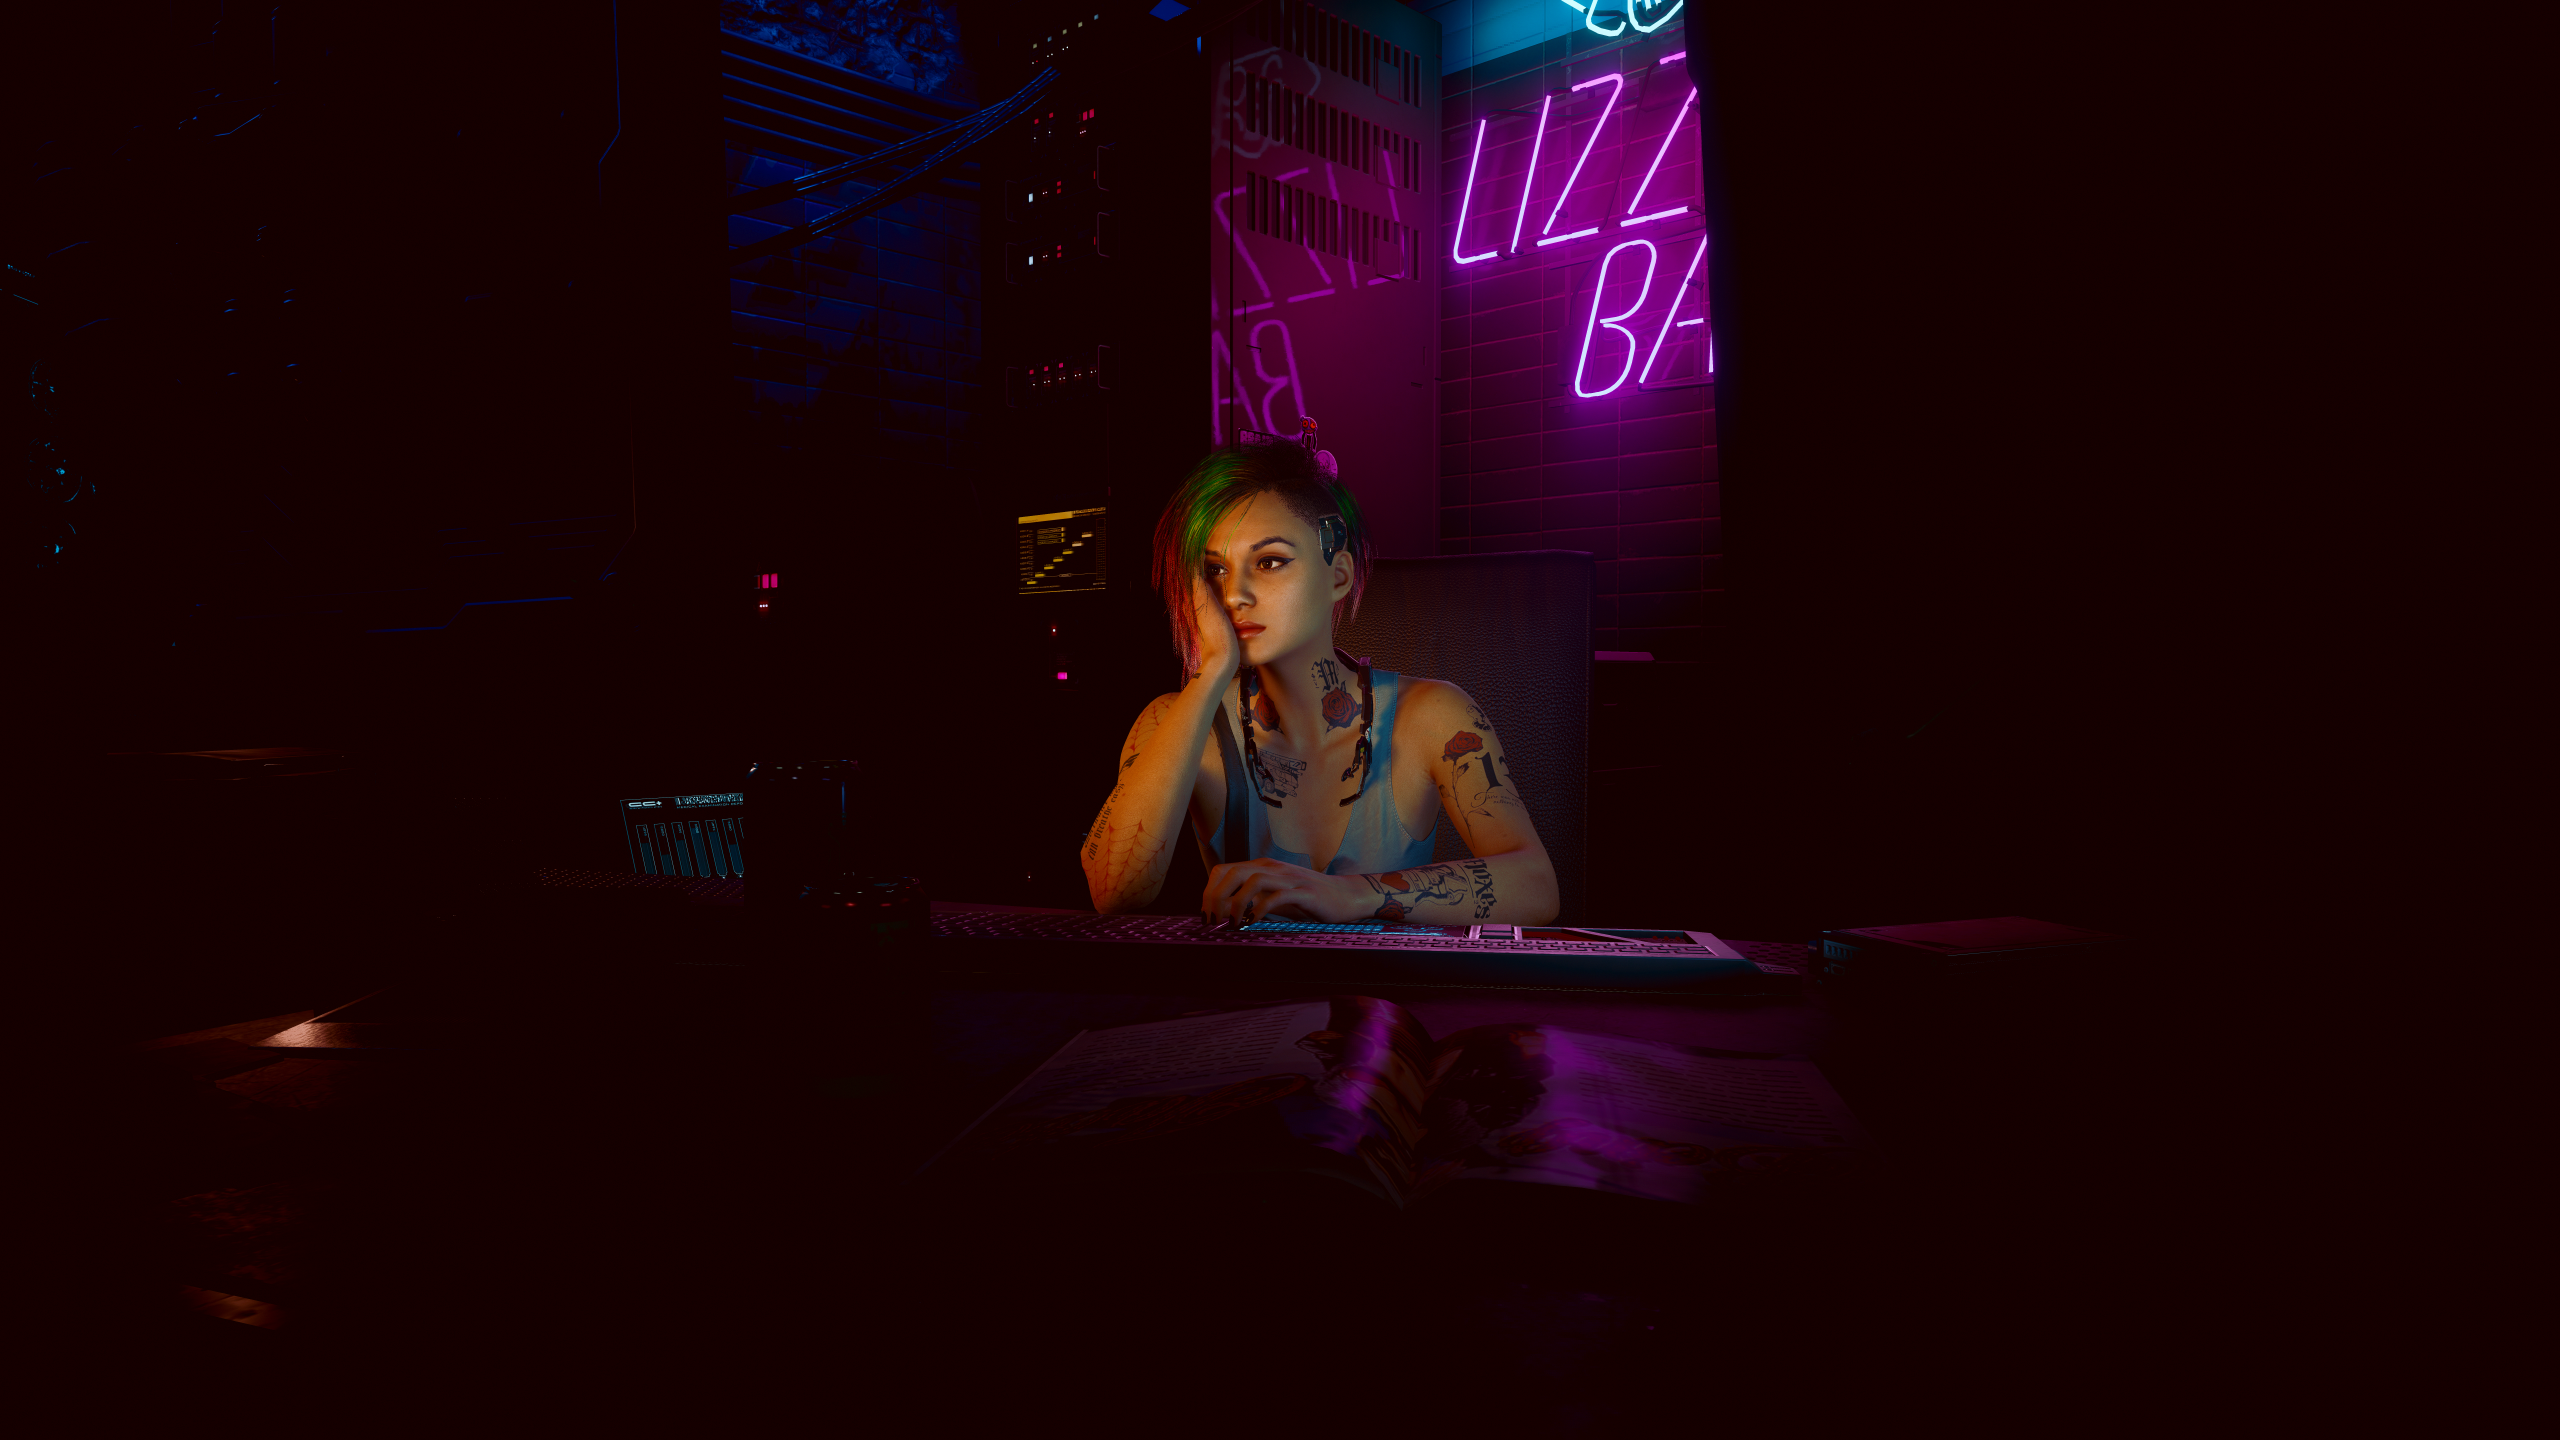 General 2560x1440 Cyberpunk 2077 Judy Alvarez digital art video games low light video game characters CGI video game girls short hair video game art screen shot tattoo looking away touching face neon night sitting chair keyboards closed mouth technology reflection sleeveless